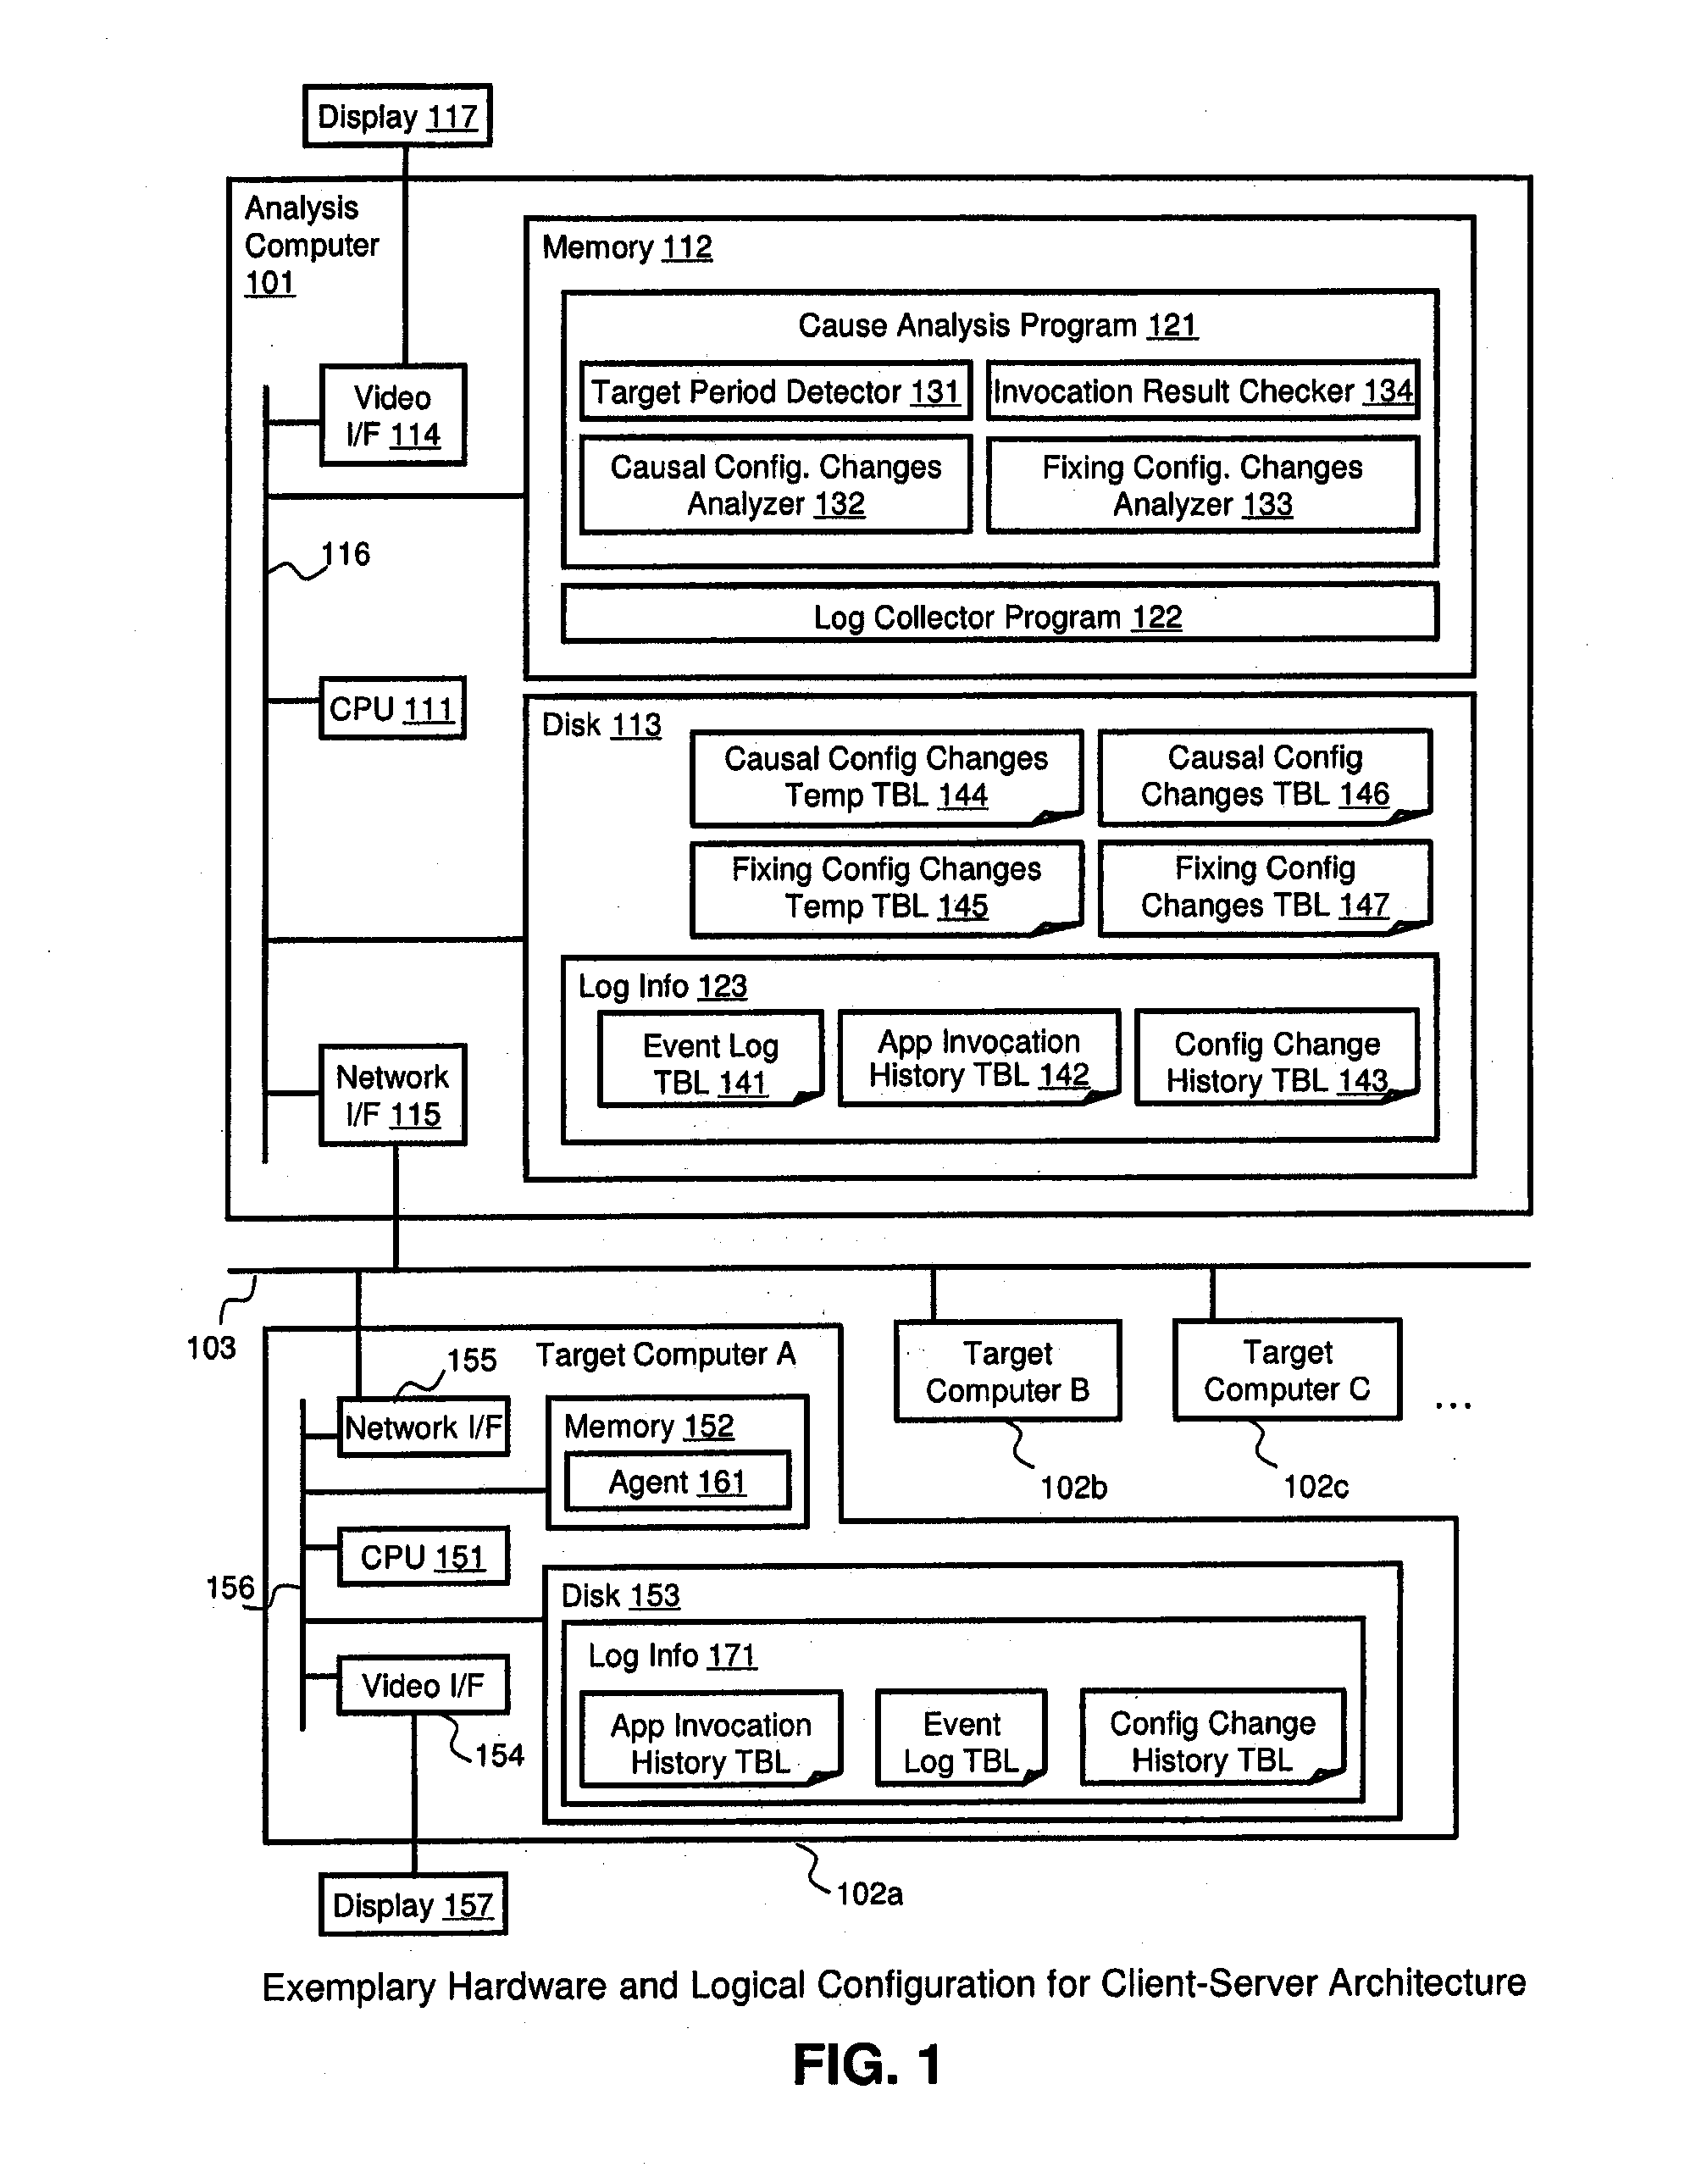 Method and apparatus for cause analysis involving configuration changes